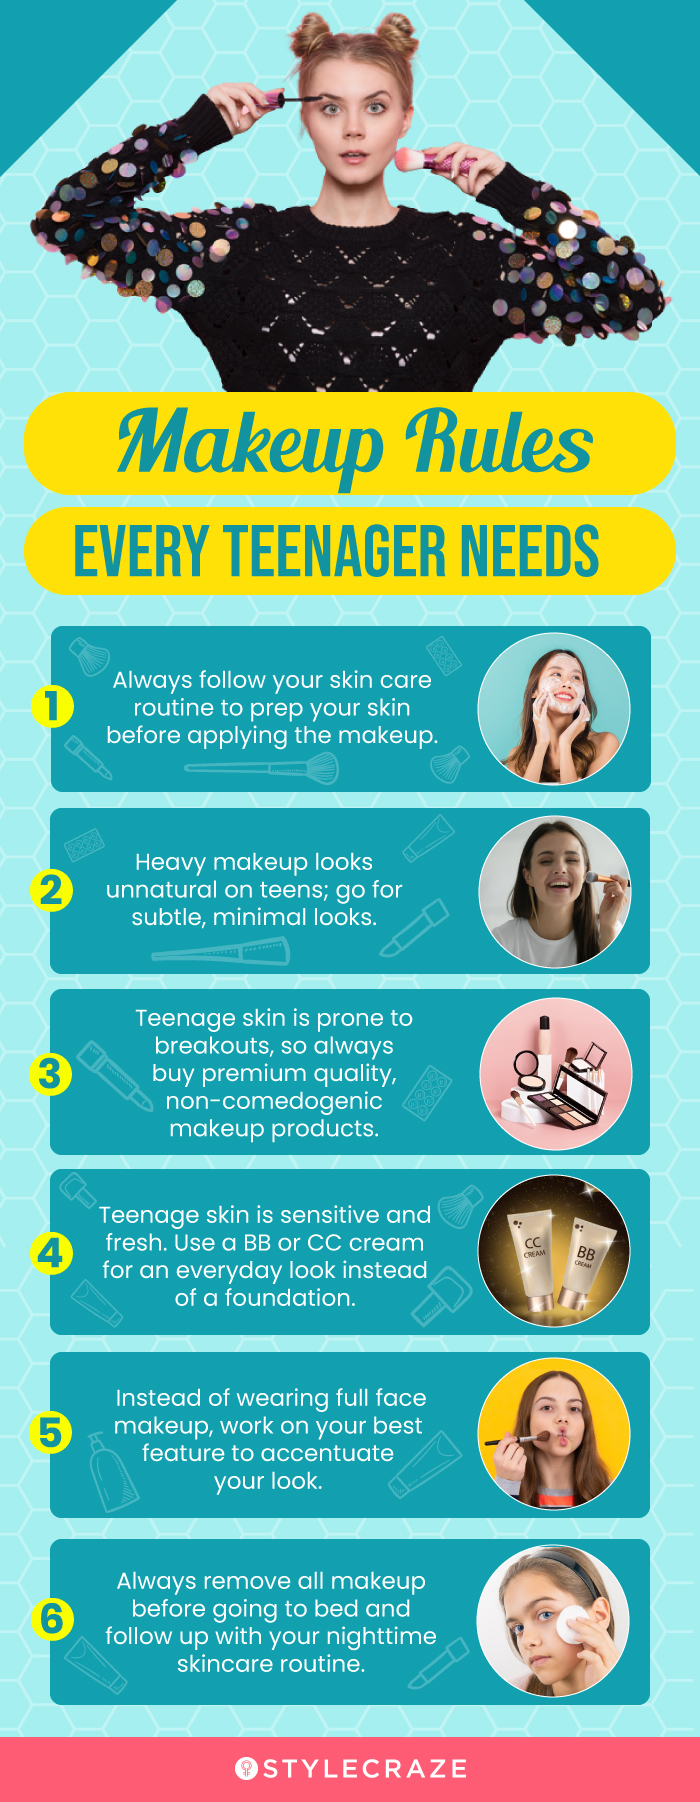 Makeup Tips You Wish To Have Known As A Teenager - Thrive Global